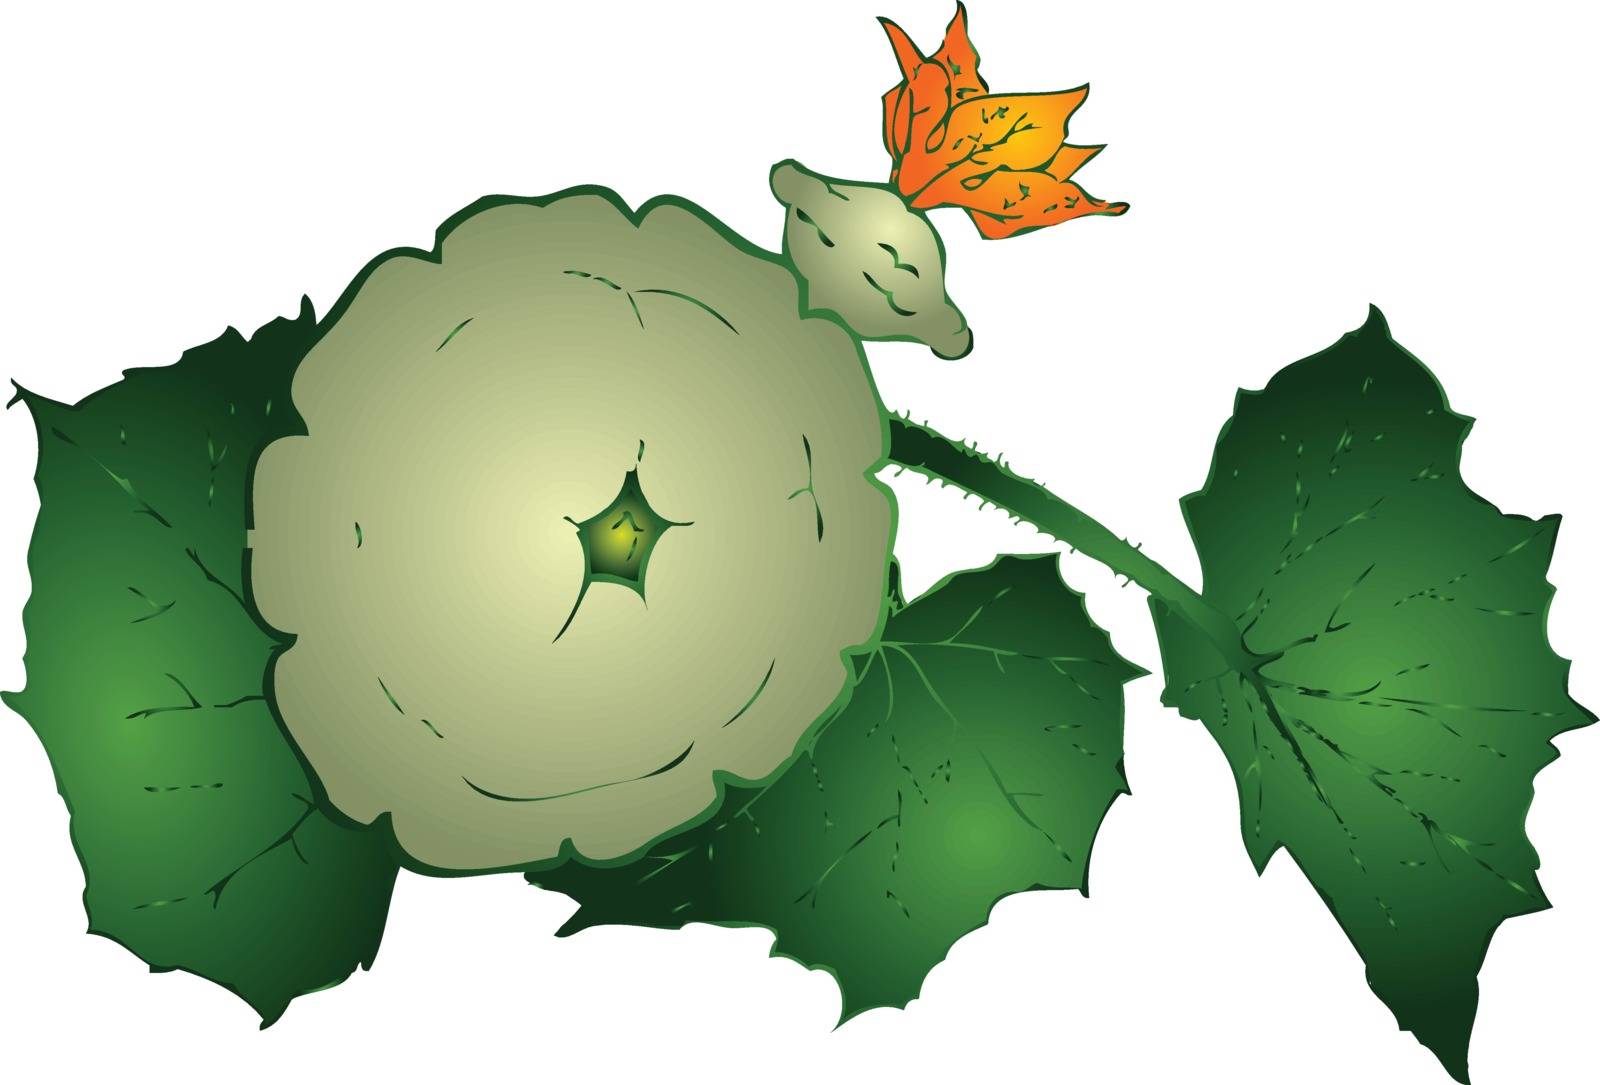 Agricultural vegetable - Round zucchini on a branch. Vector illustration.